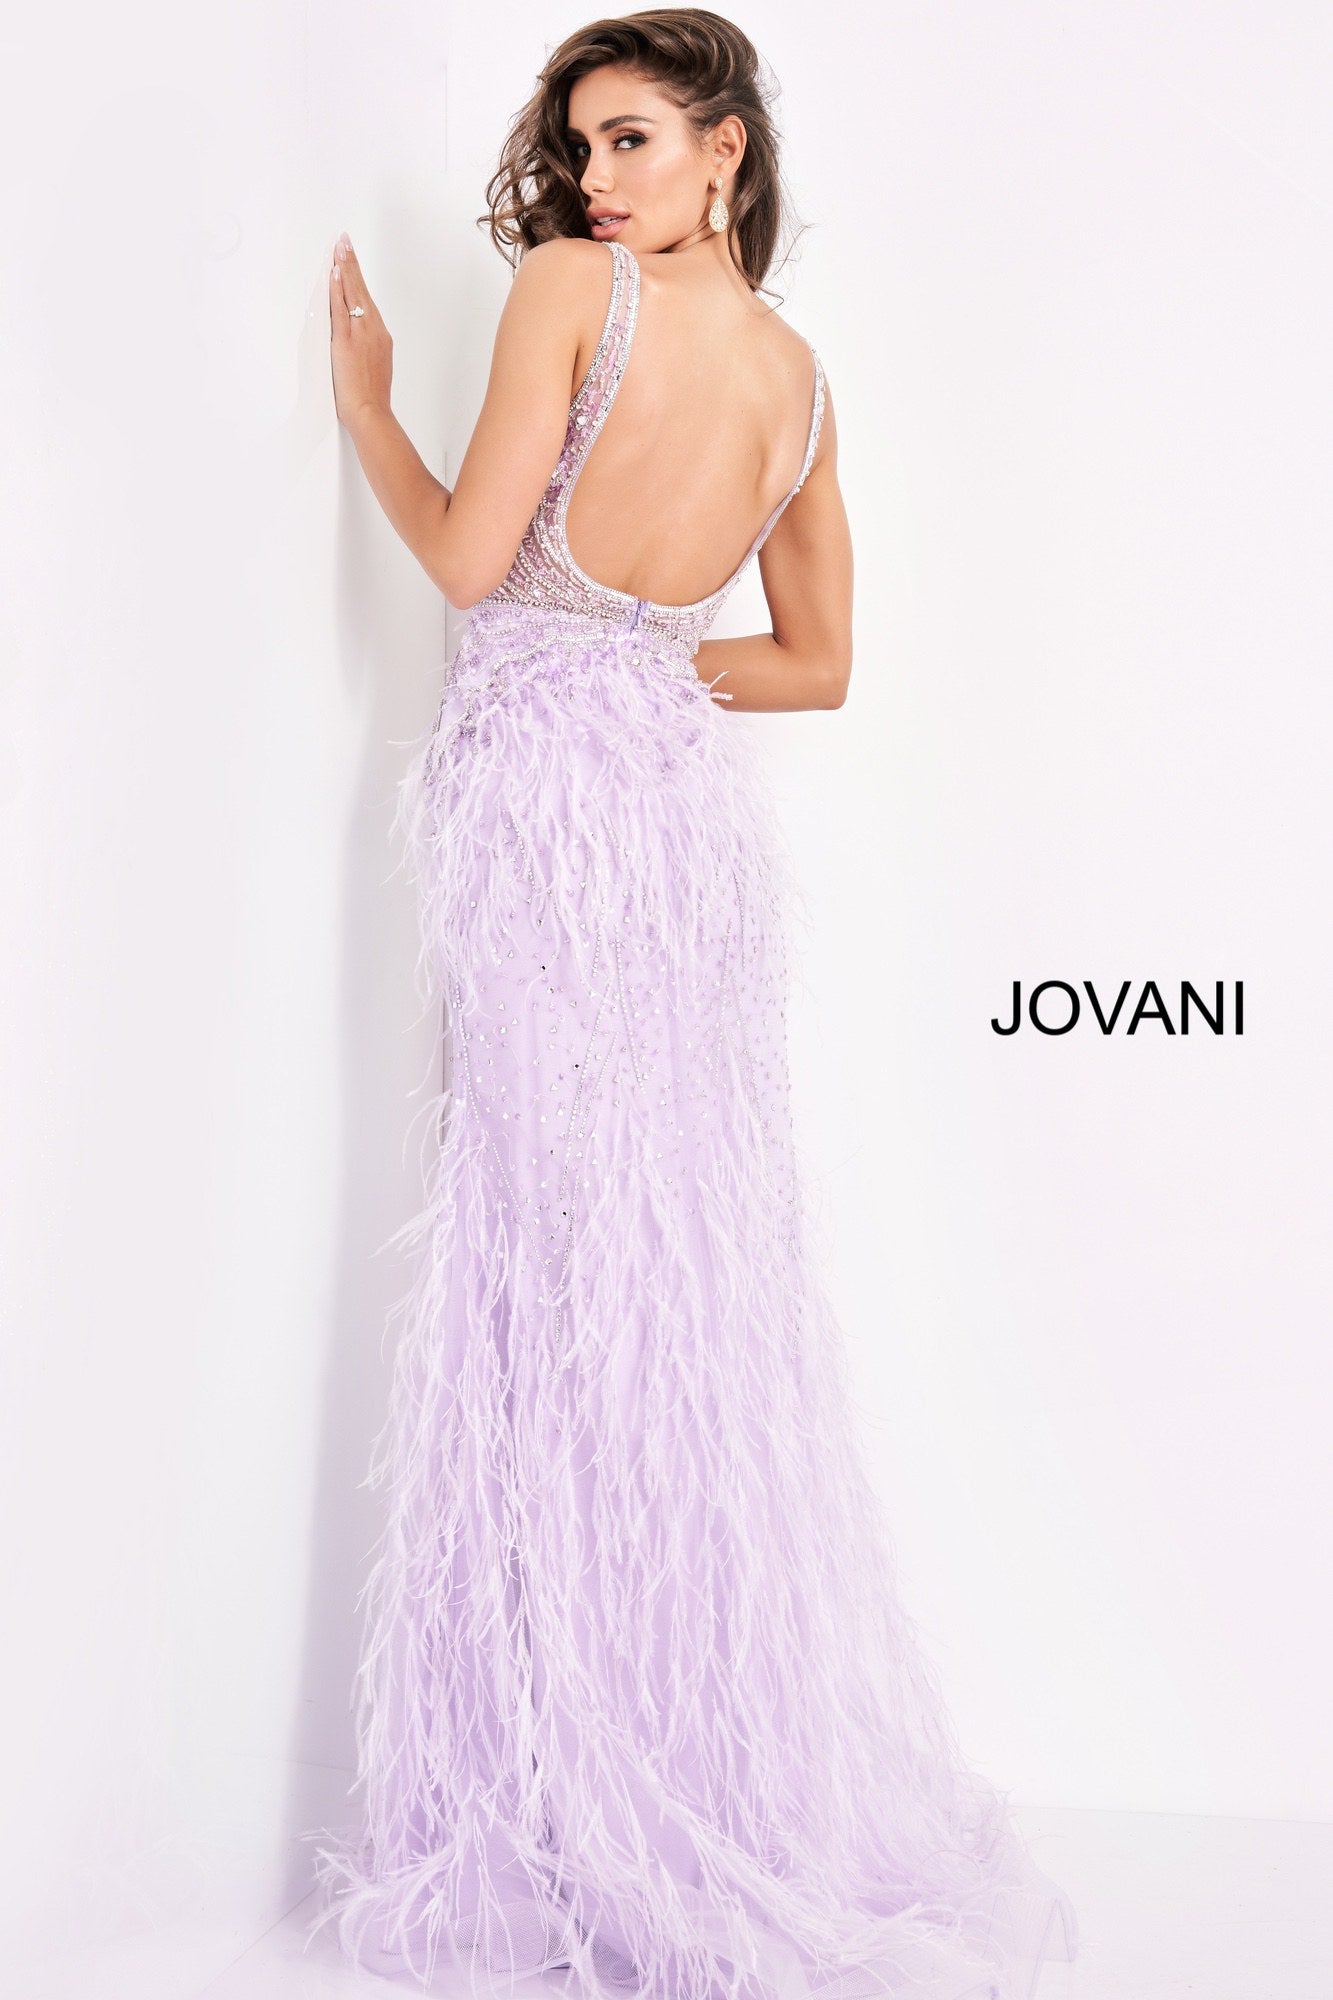 Jovani 03023 is a 2021 Prom Dress, Pageant Gown, Wedding Dress & Formal Evening wear. This Sheer embellished bodice features a plunging v neckline with beading & crystal accents cascading through a feather embellished skirt. Very stunning and unique wedding dress!   Available Colors: Off White, Blush, Black  Available Sizes: 00-24